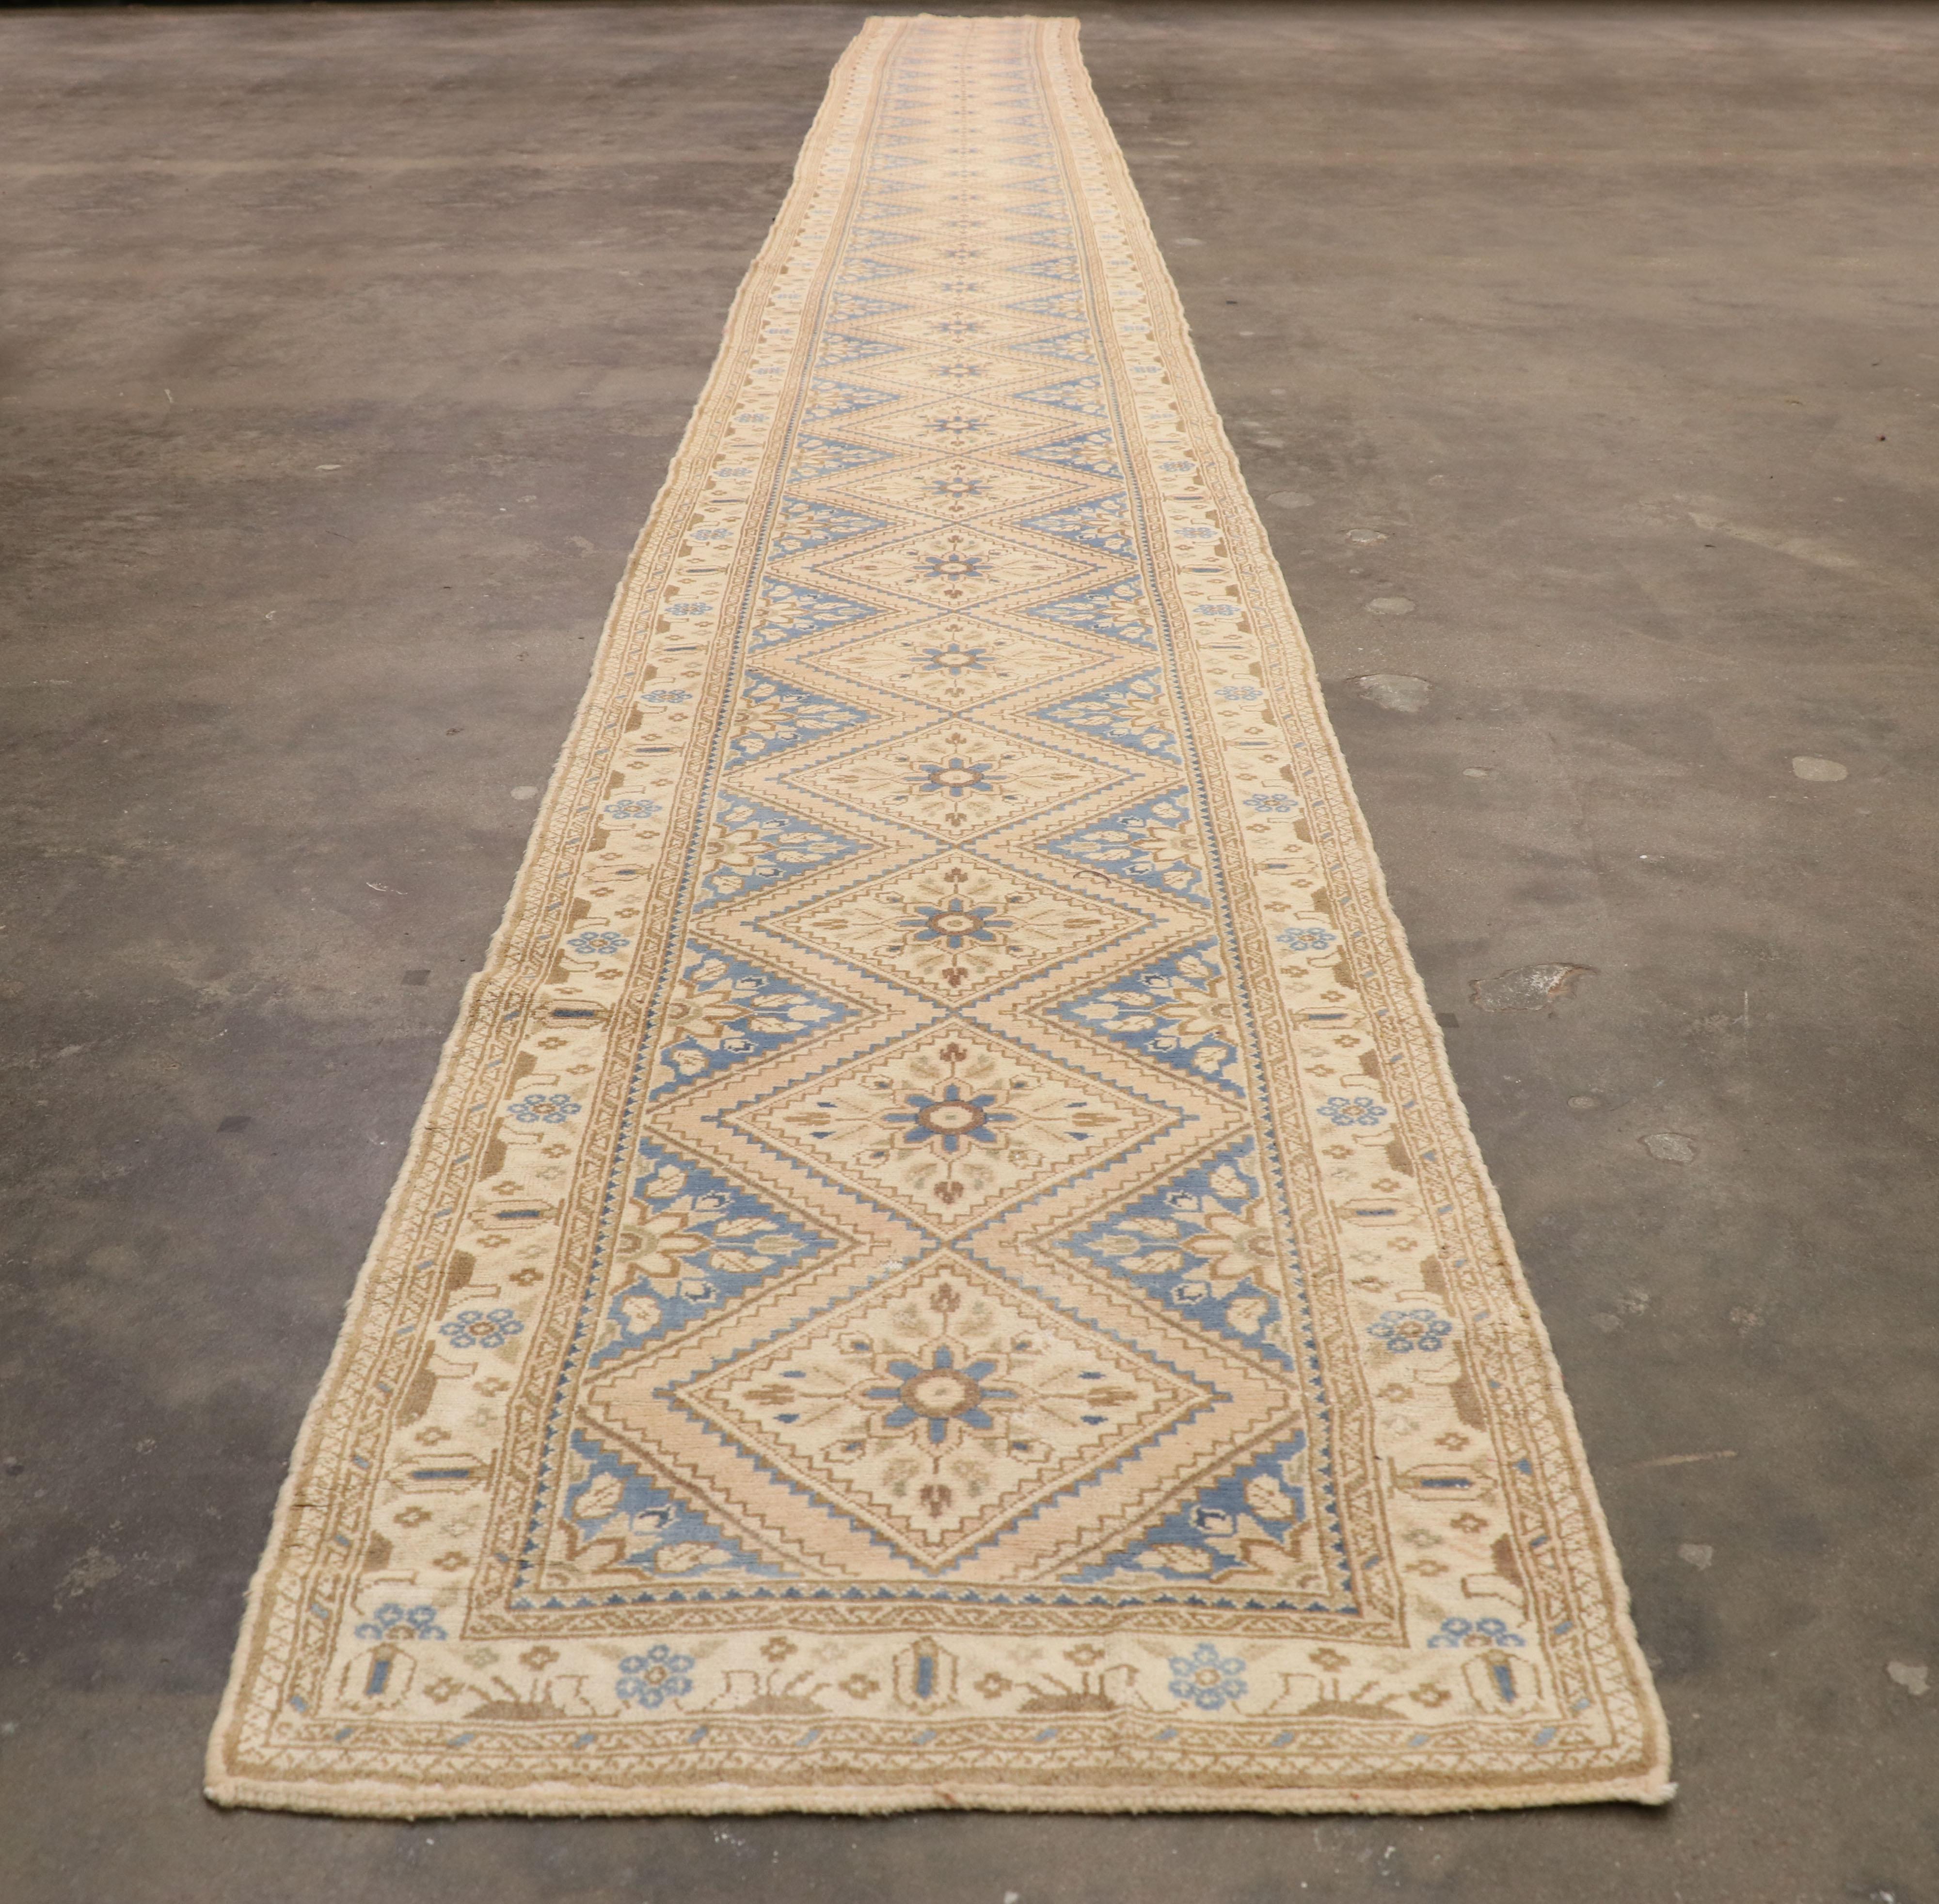 Antique Persian Malayer Runner with French Provincial Style, Long Hallway Runner 1